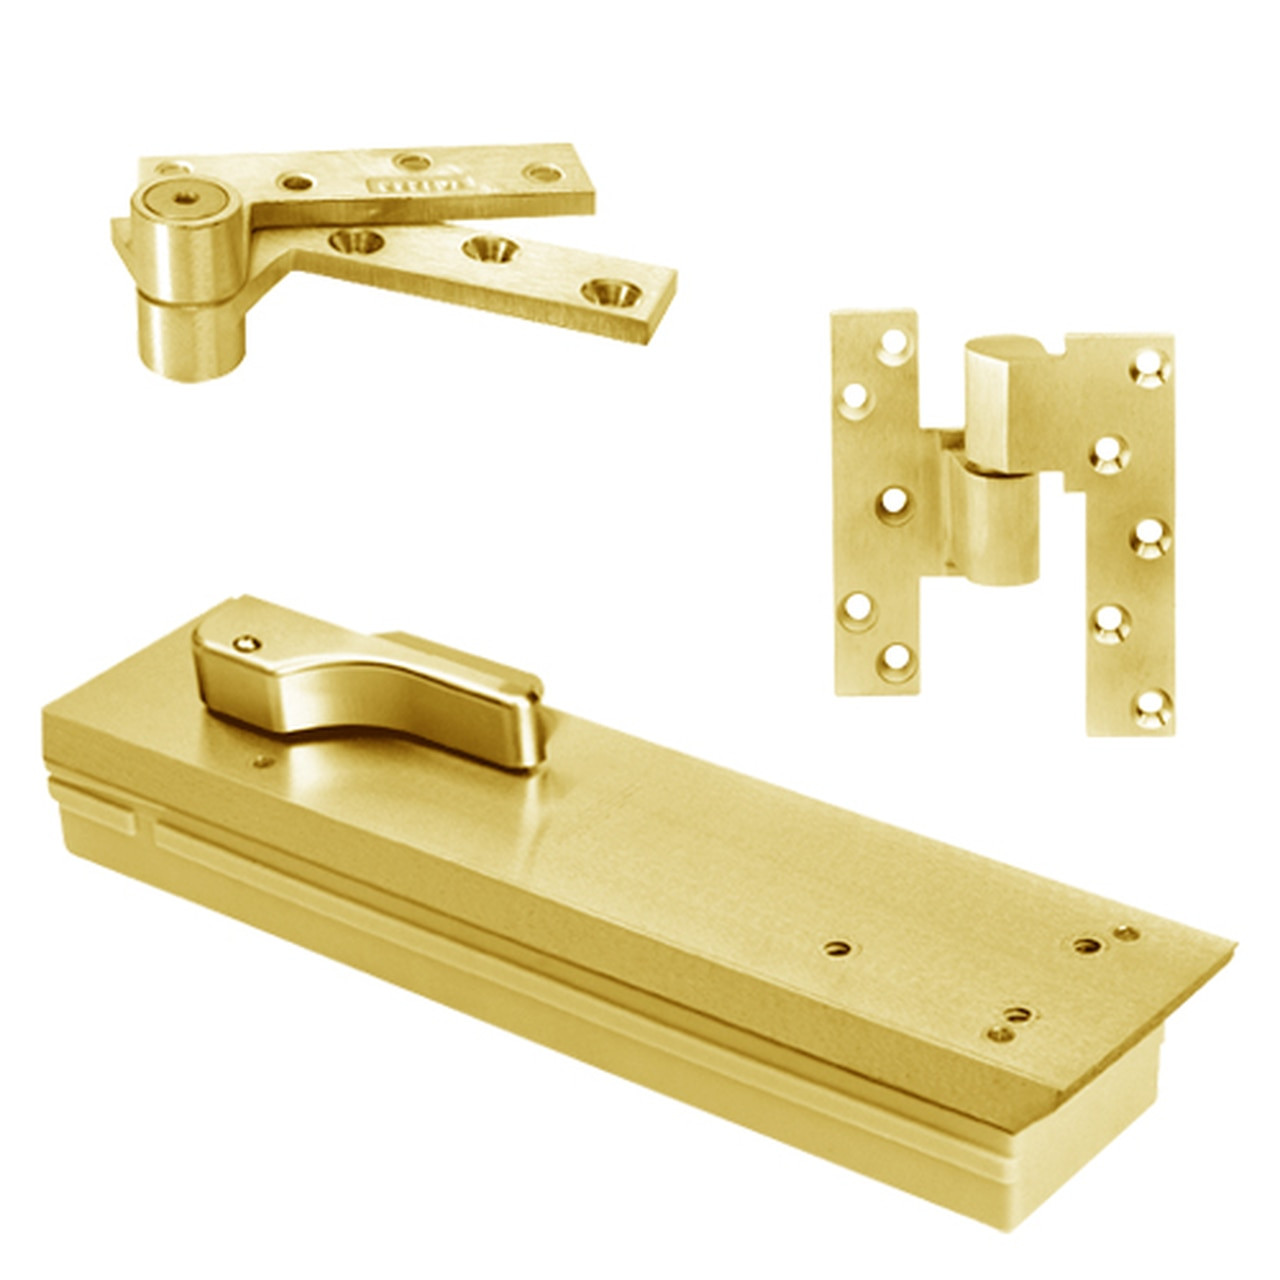 FQ5104NBC-SC-LH-605 Rixson Q51 Series Fire Rated 3/4" Offset Hung Shallow Depth Floor Closers in Bright Brass Finish